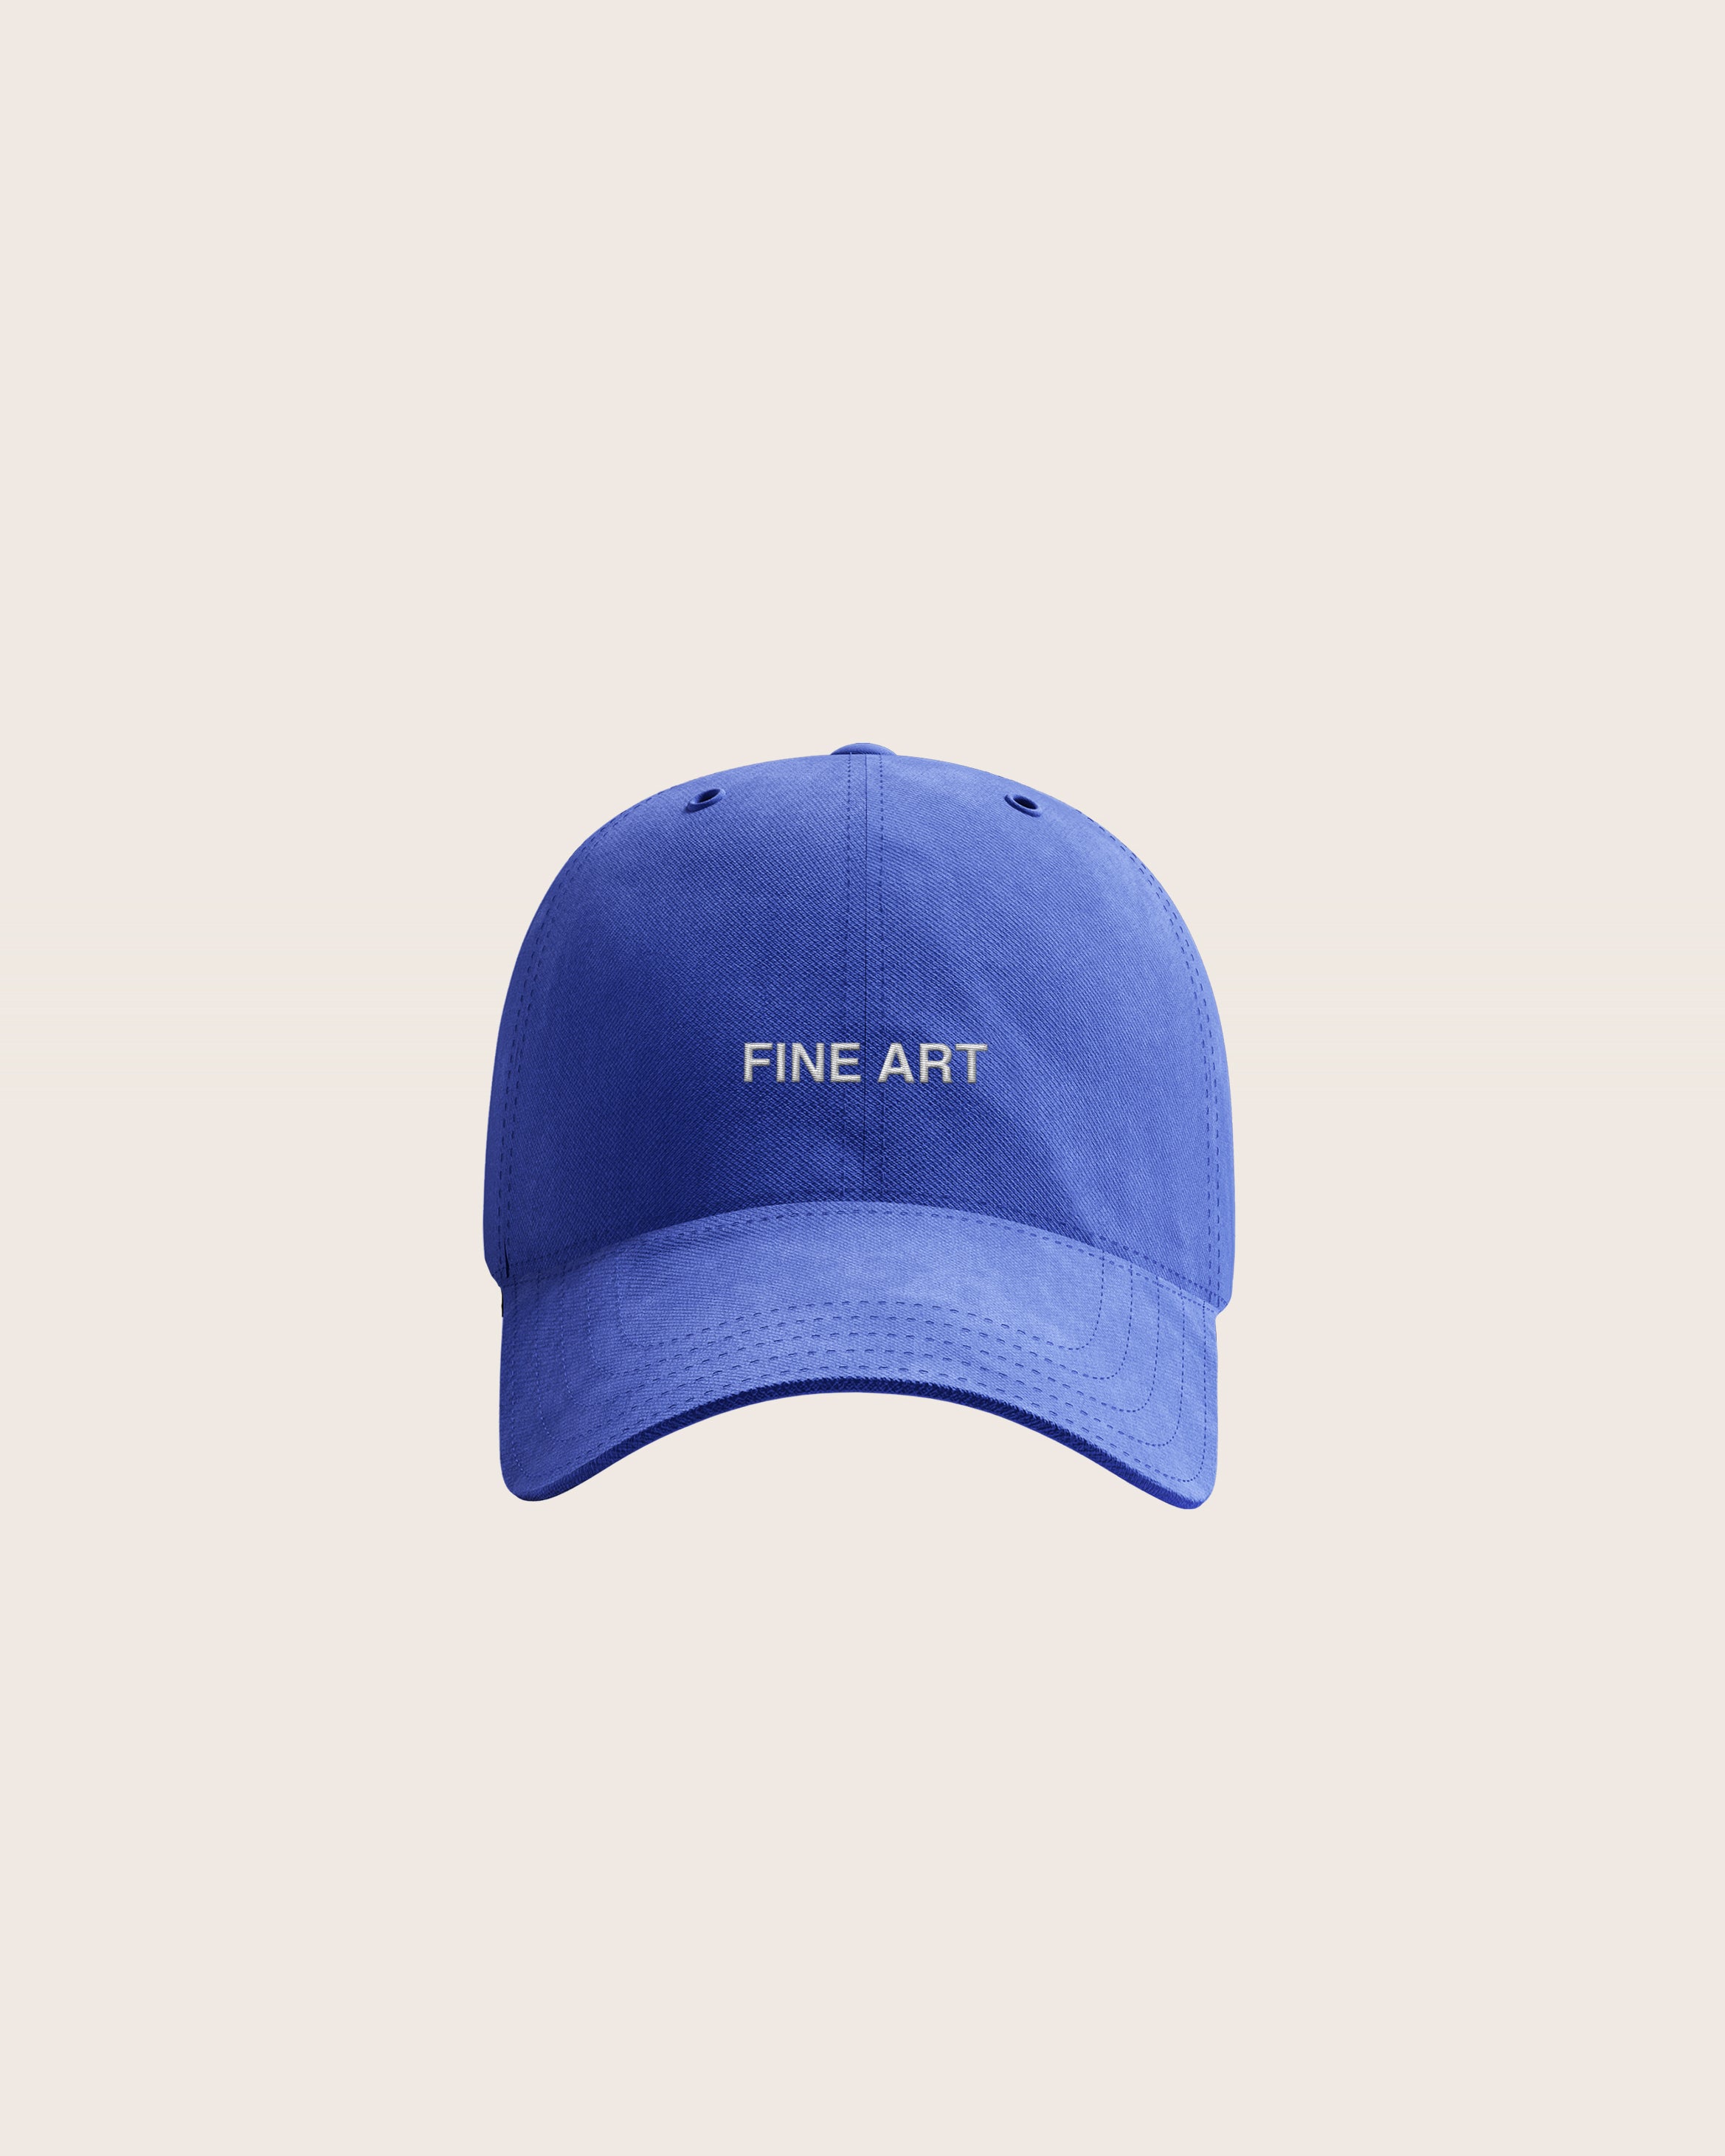 Blue Baseball Cap / Dad Hat with Fine Art Movement Silver Text Embroidery on Front. 100% Cotton.